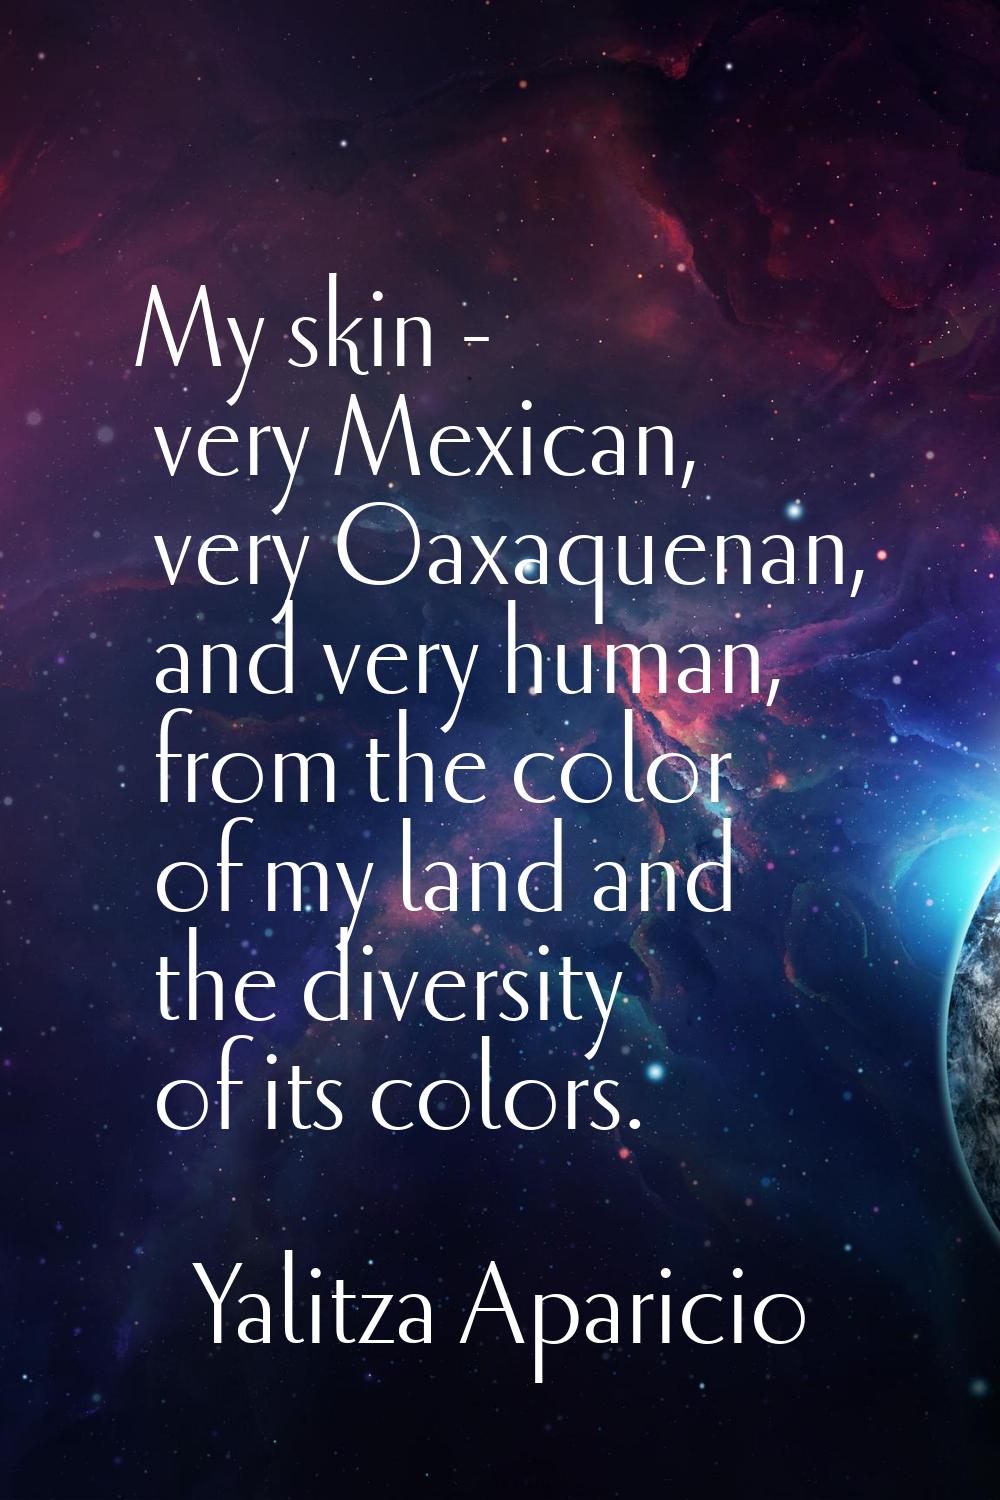 My skin - very Mexican, very Oaxaquenan, and very human, from the color of my land and the diversit